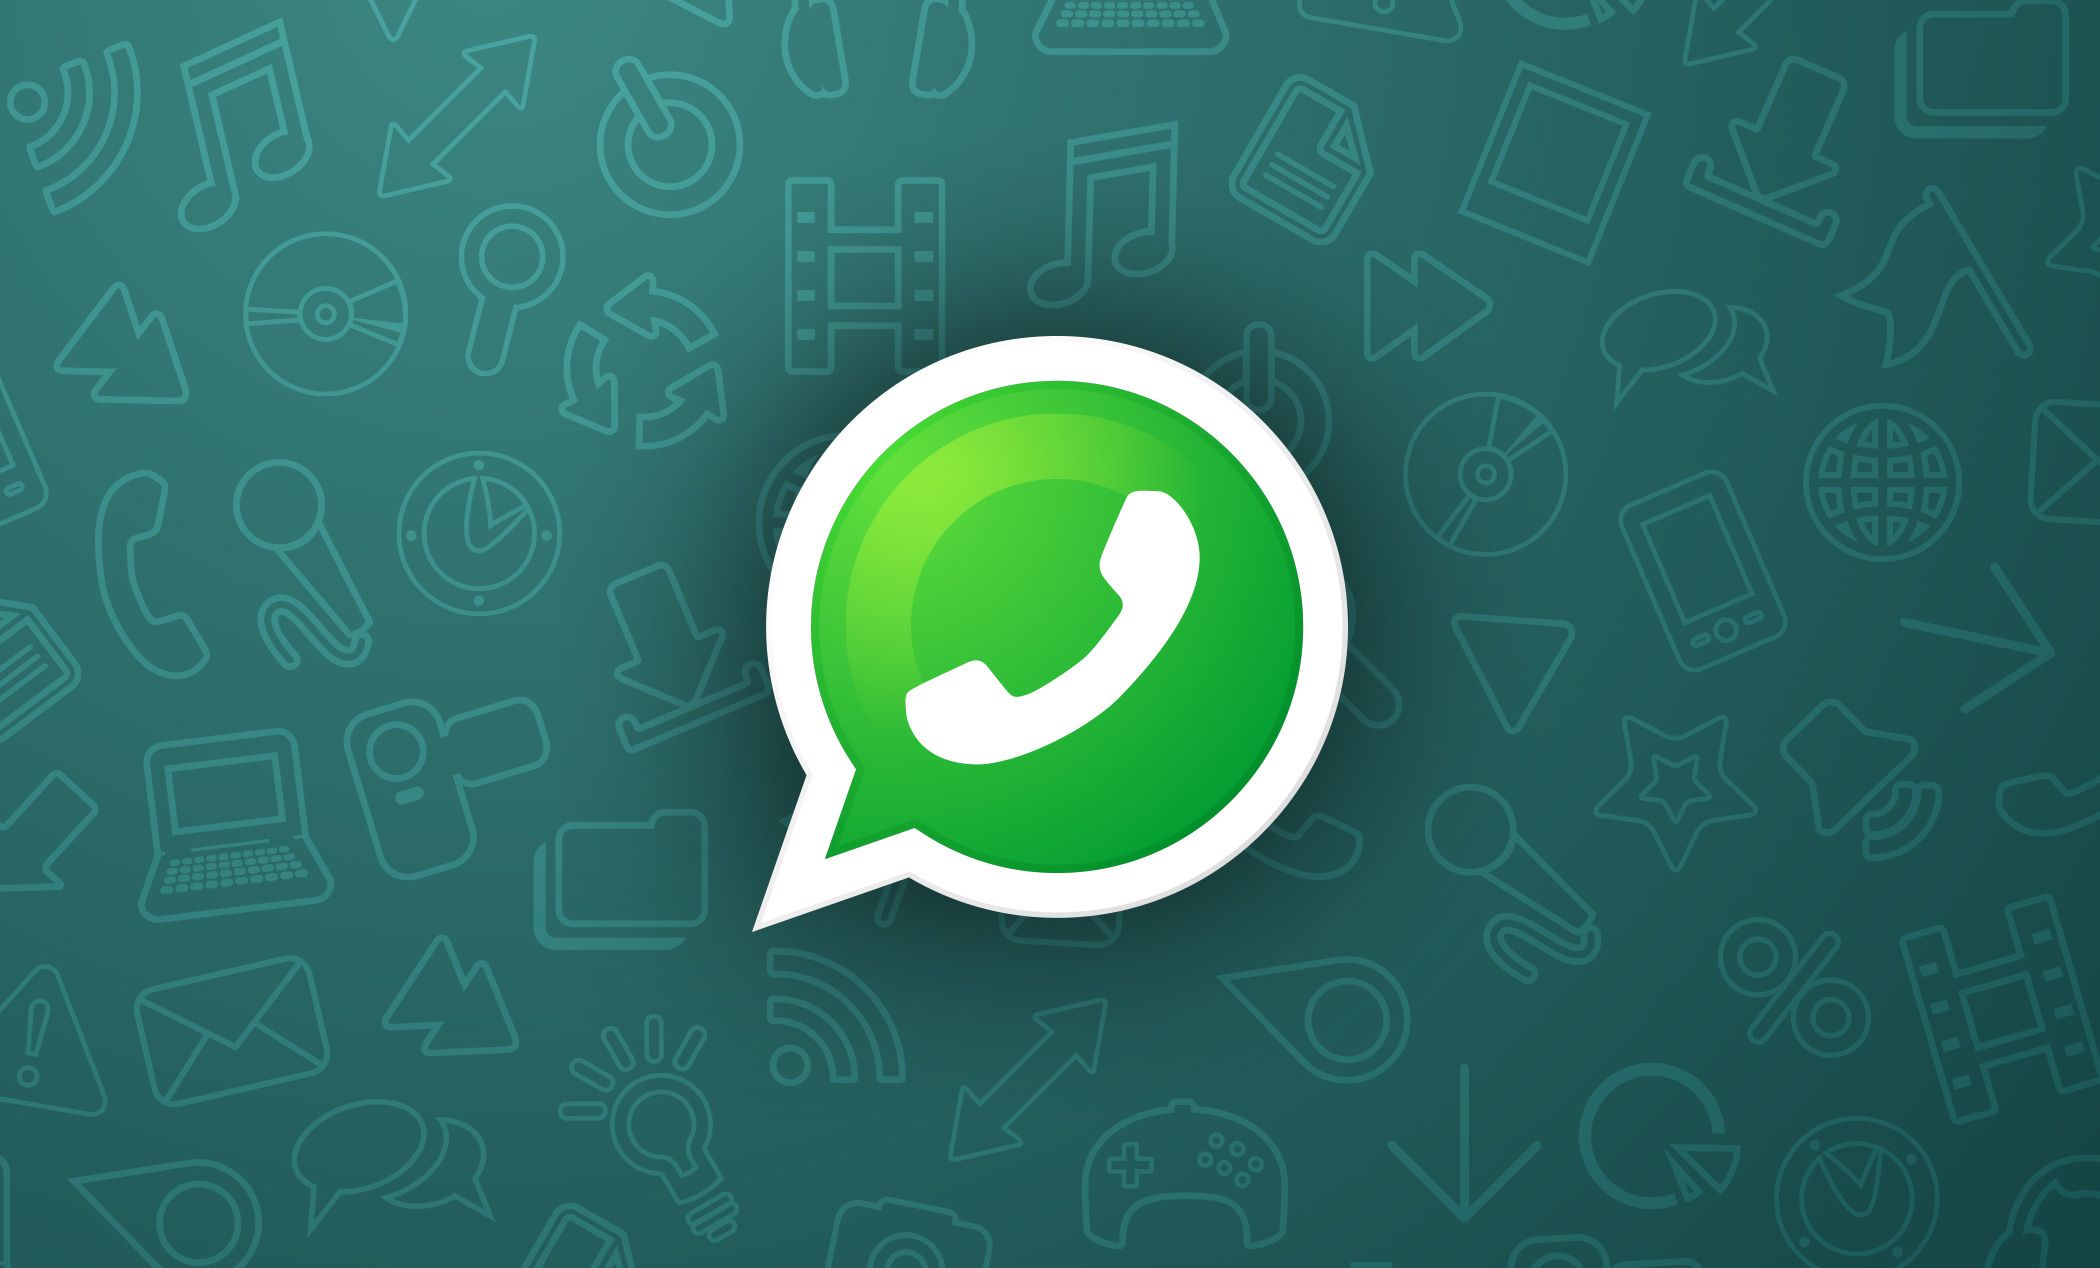 The social network WhatsApp is working on a new function for users to discover businesses near their location and to make purchases